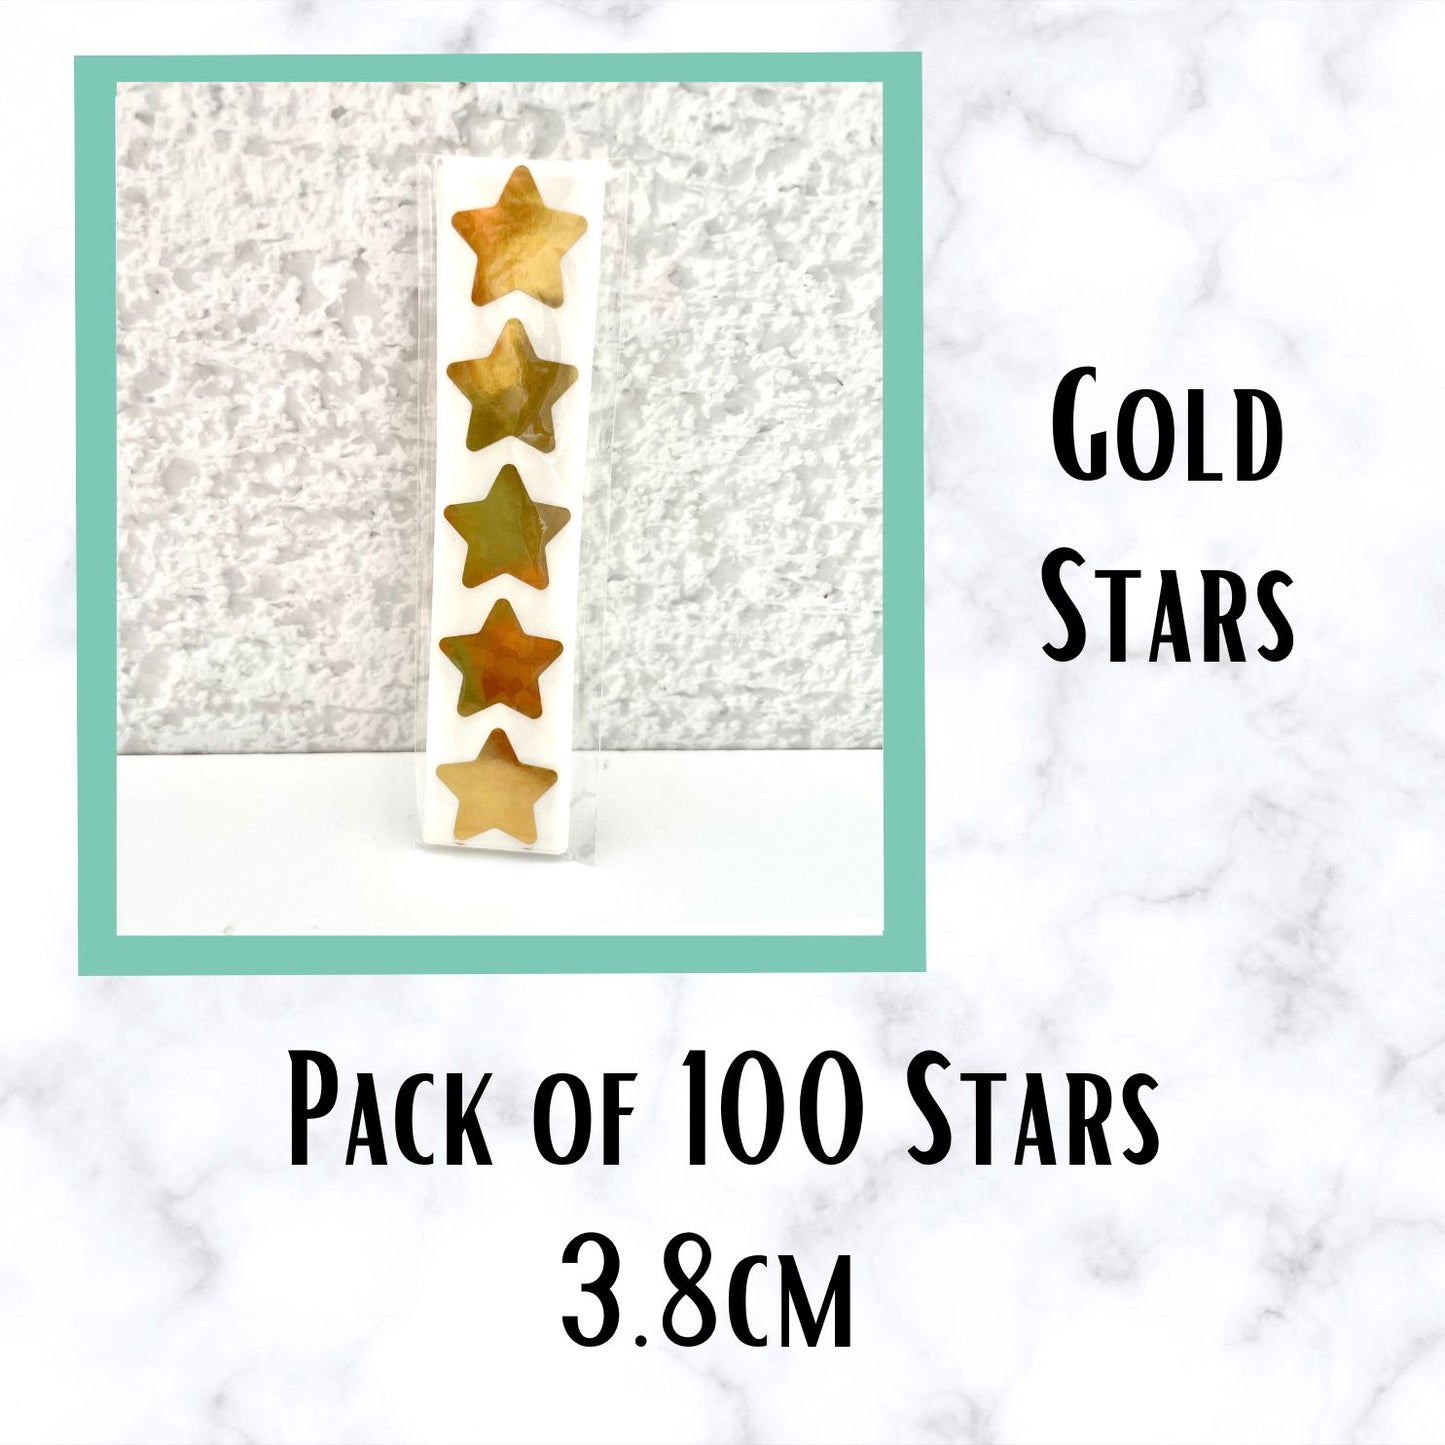 Gold Stars - Pack of 100